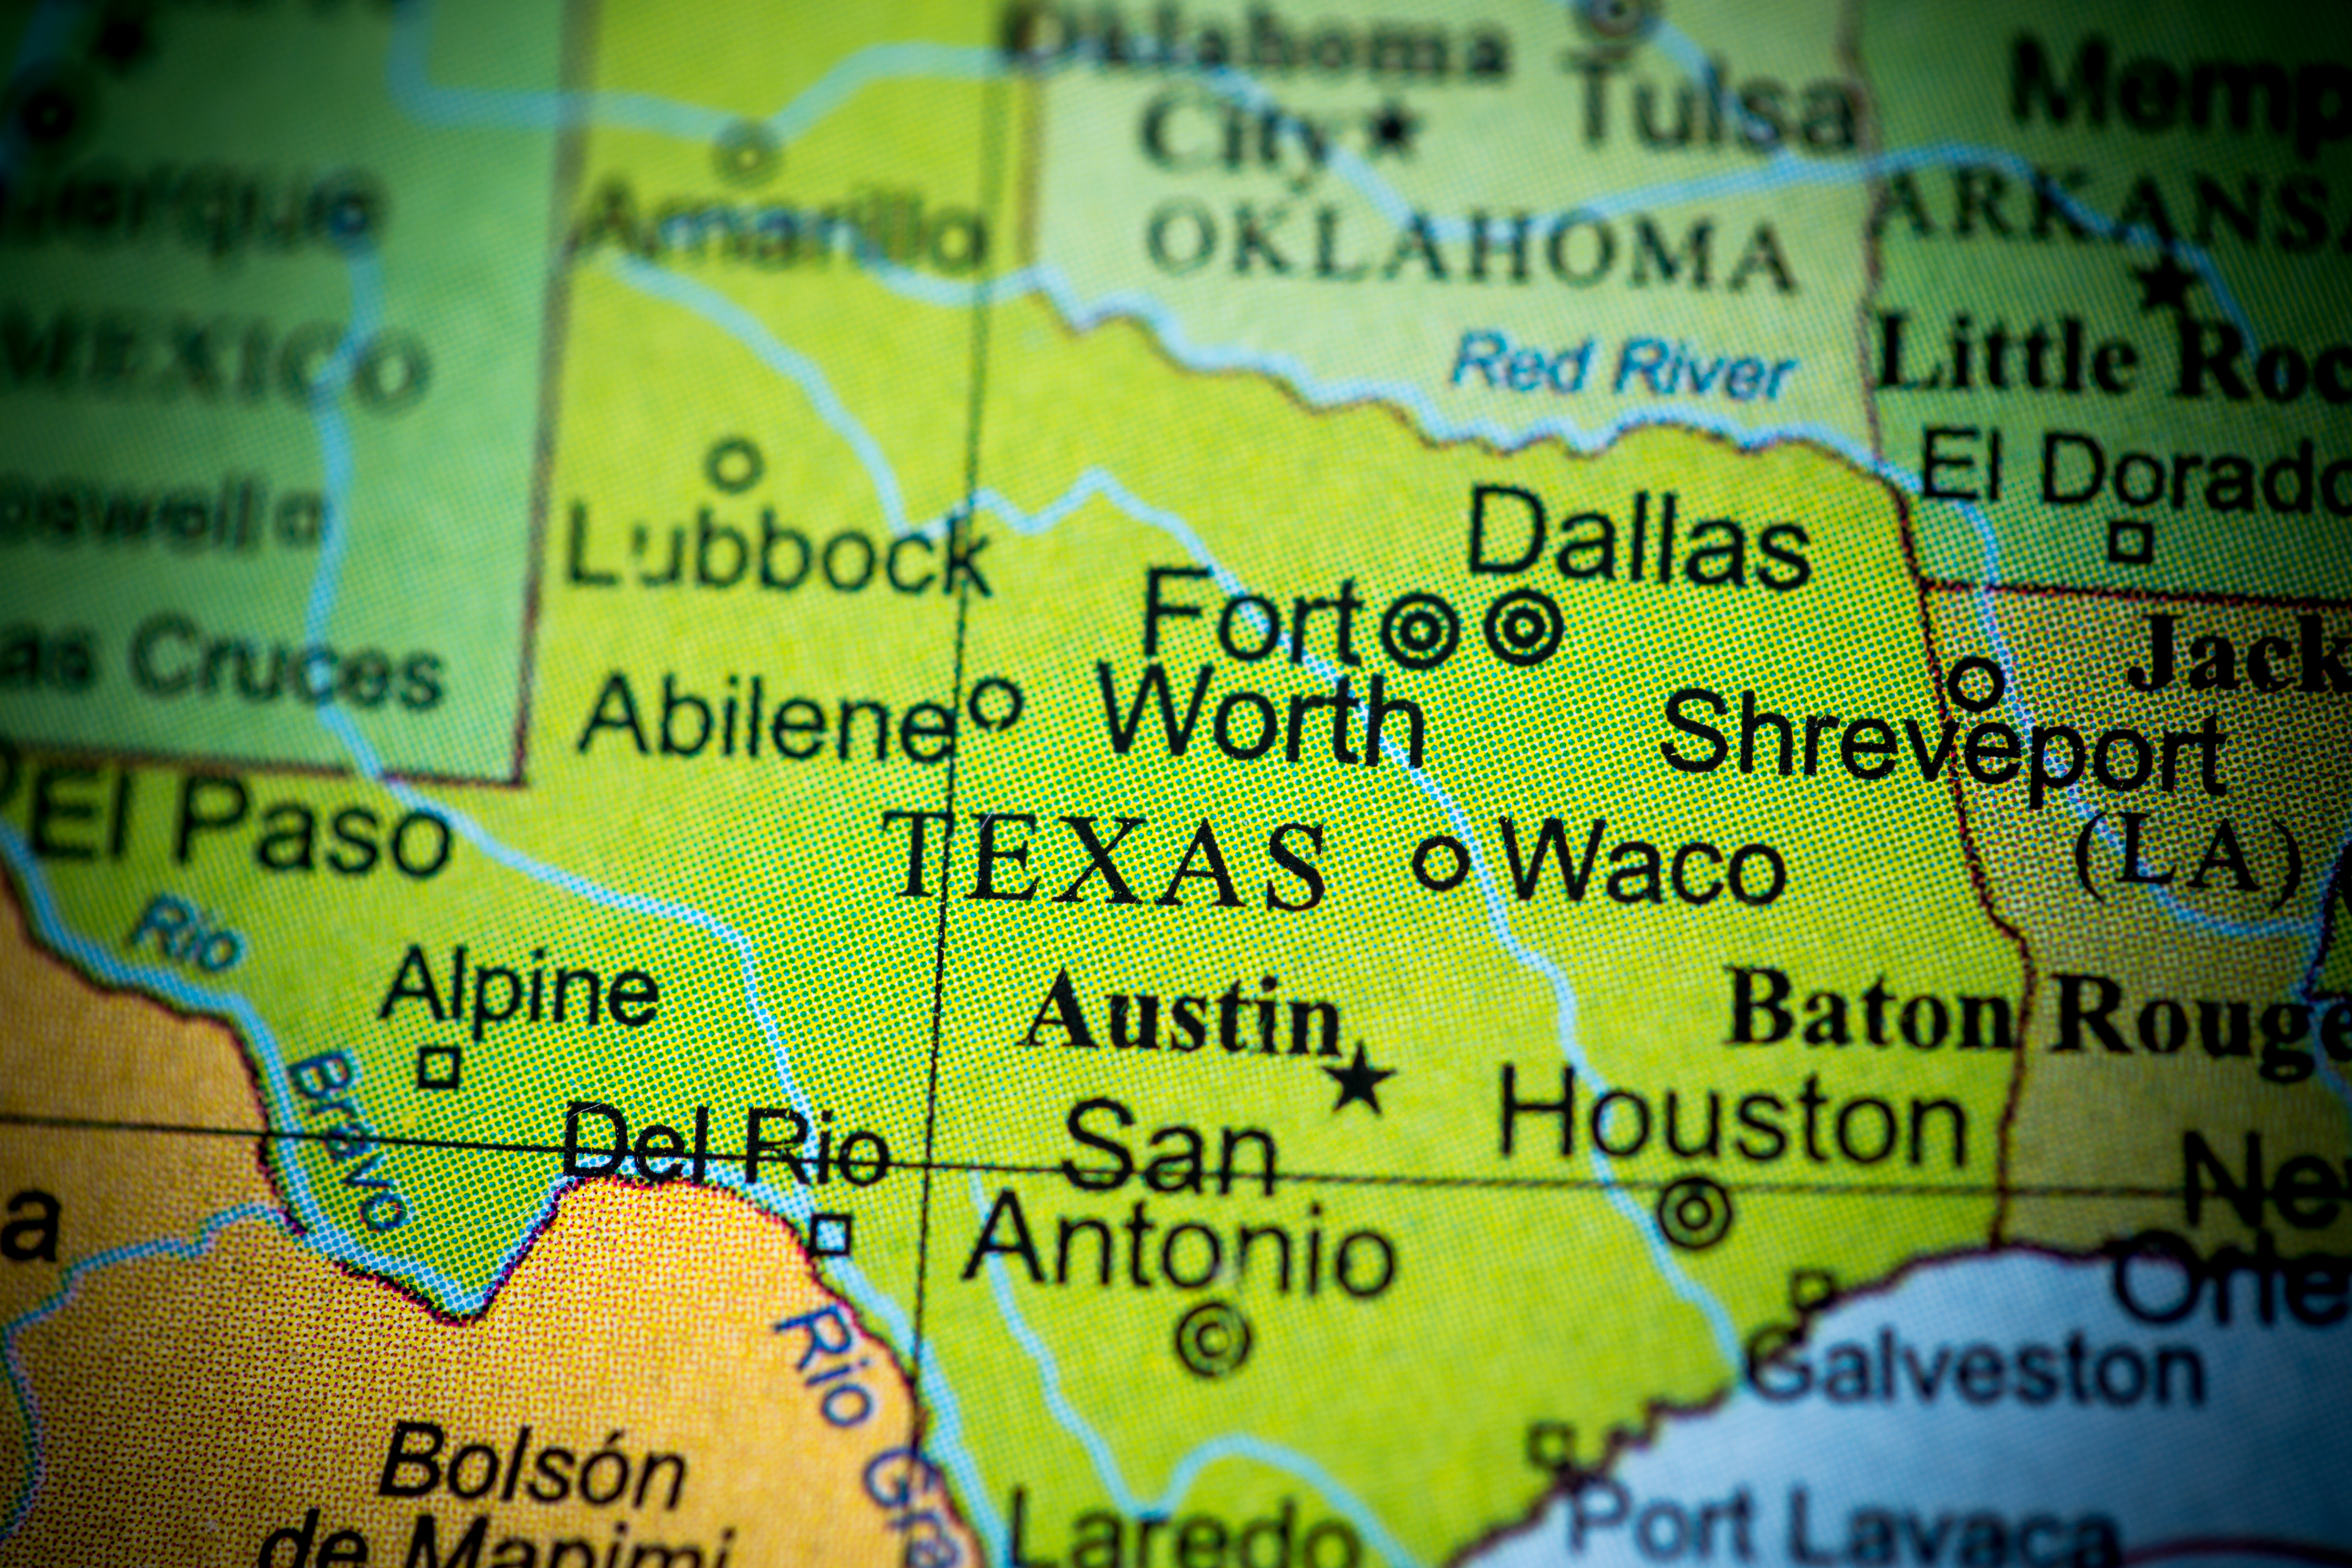 The State of Texas. Image courtesy of Victor Maschek/Shutterstock.com